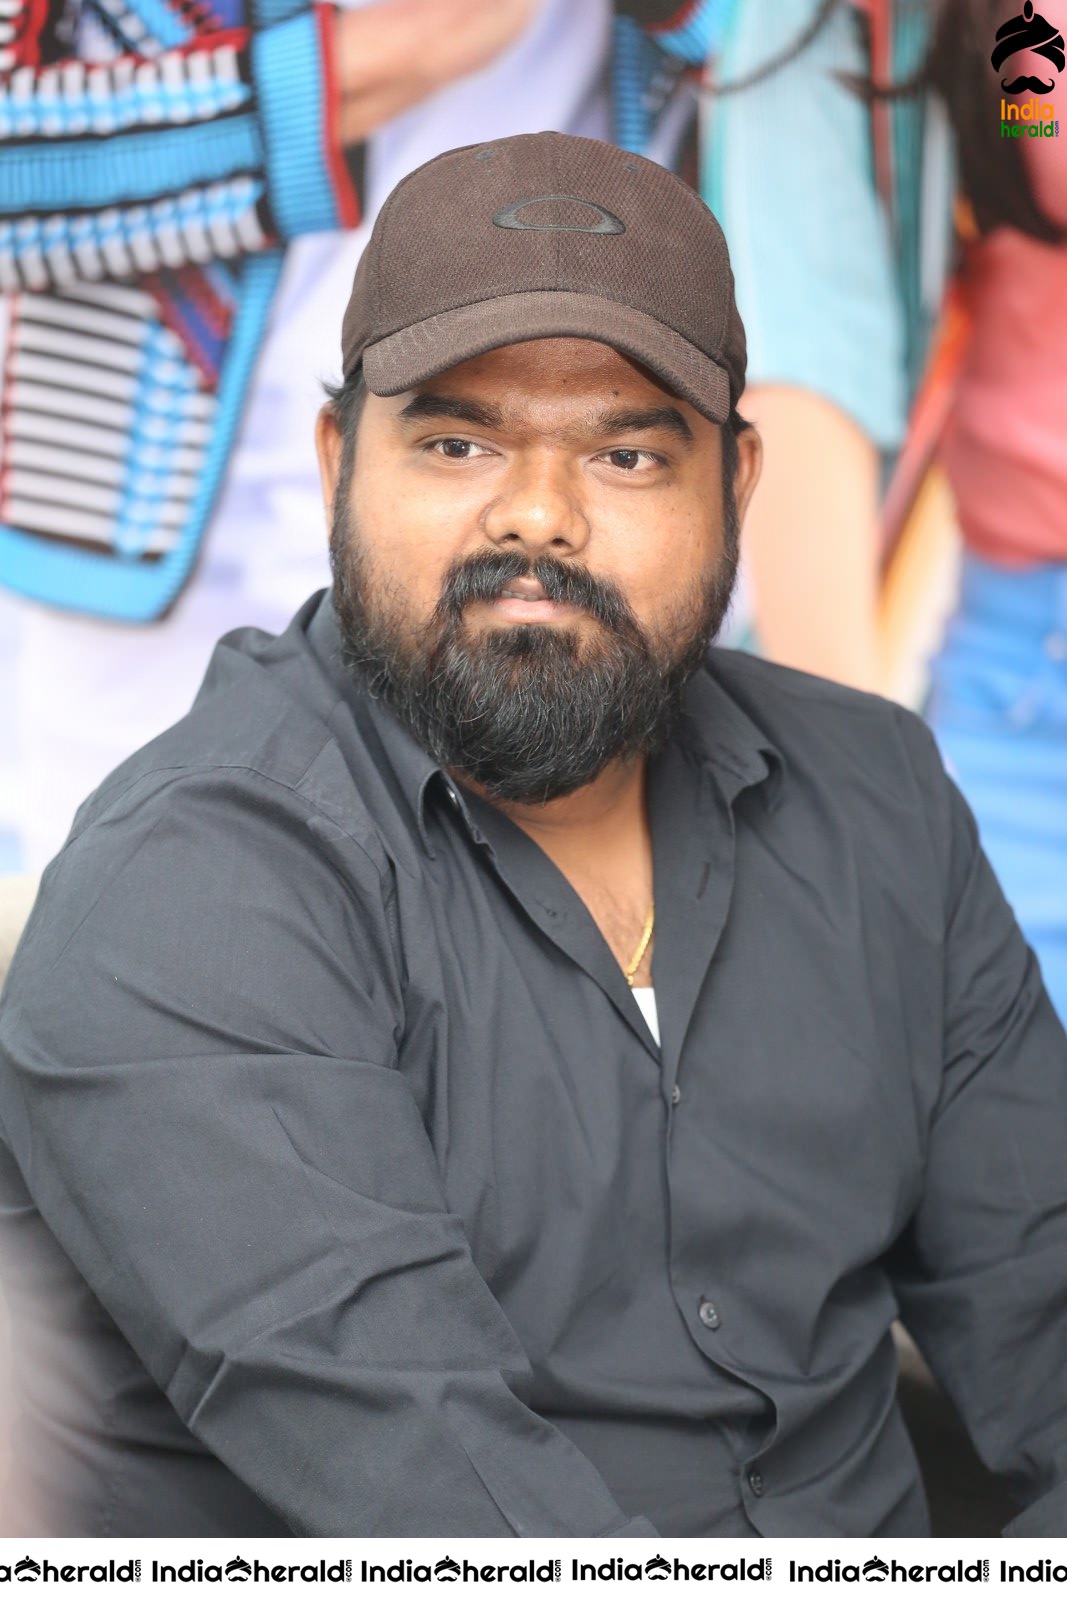 Director Venky Kudumula speaks on his future projects